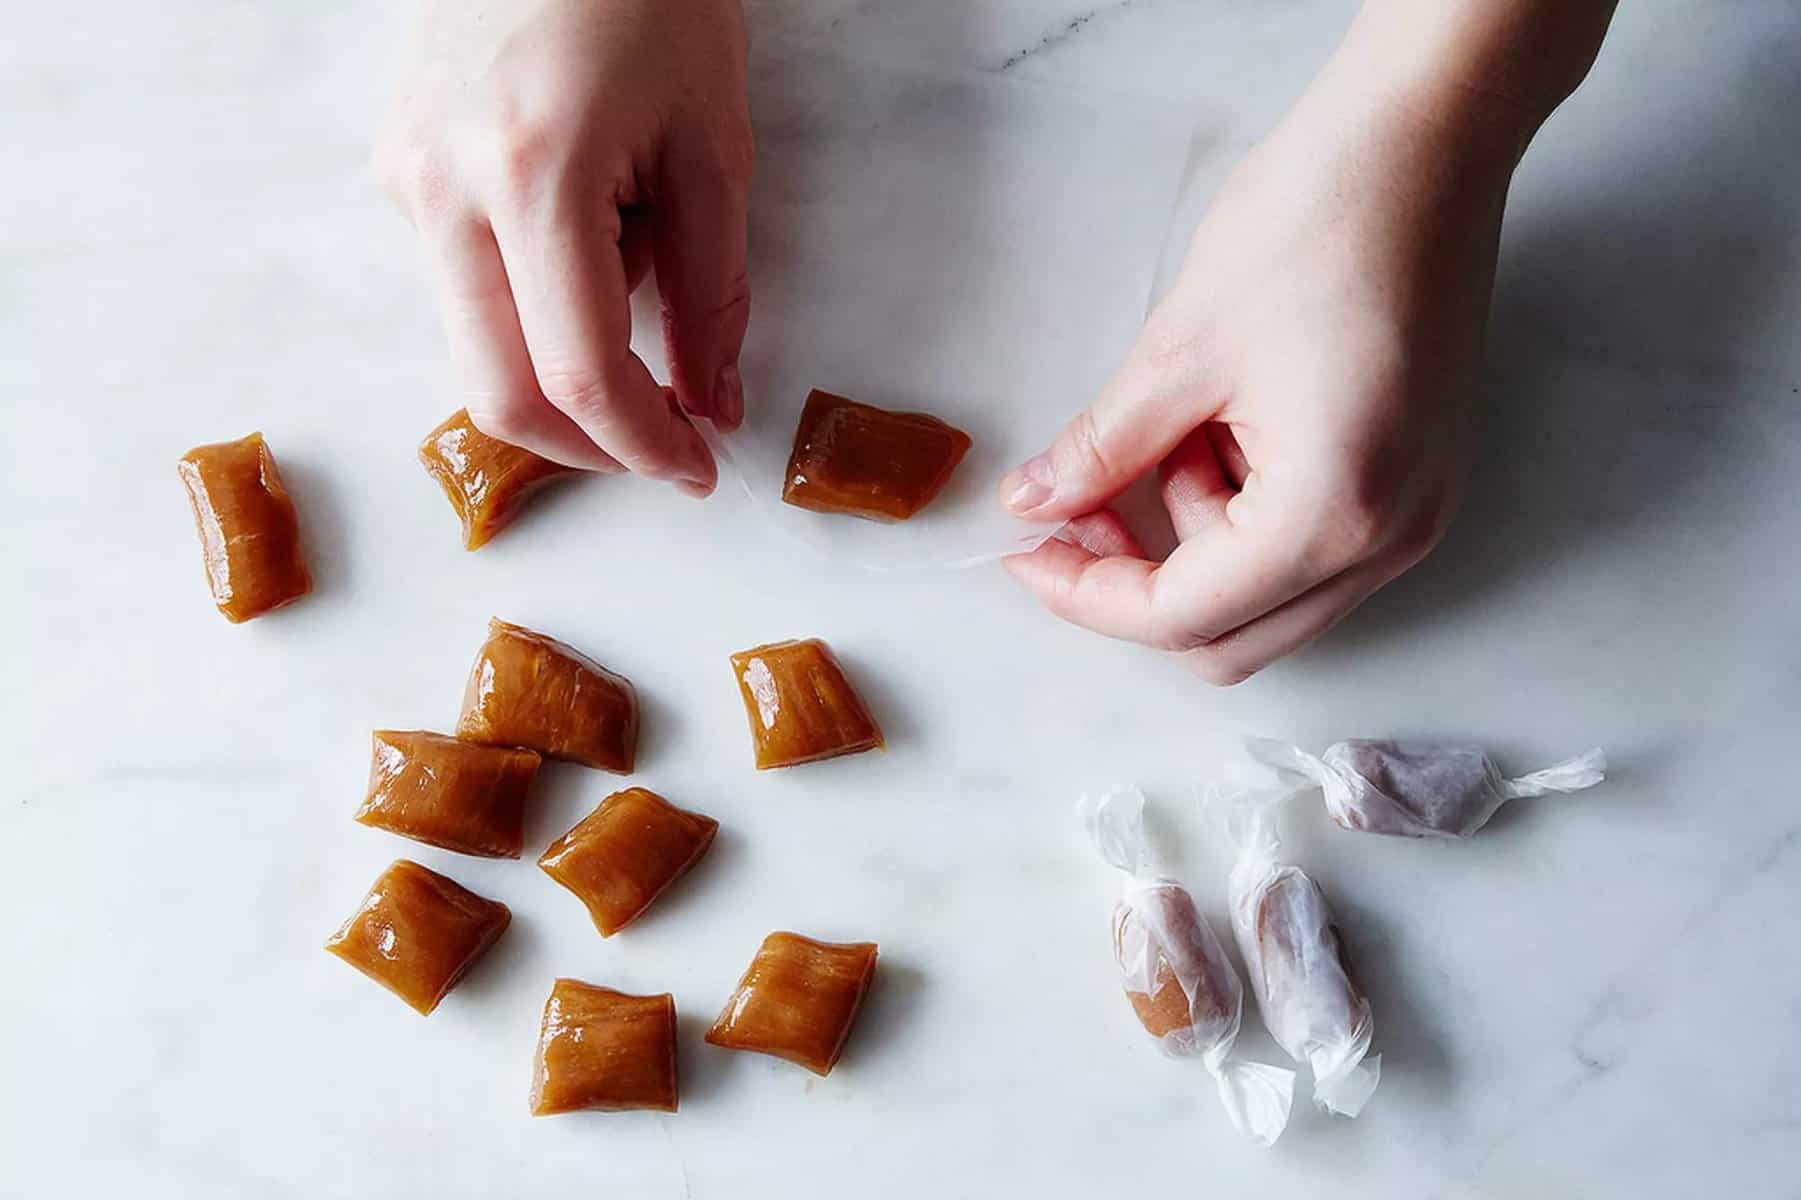 Delicious Peanut-Butter Taffy Recipe – Perfect for Snacking!